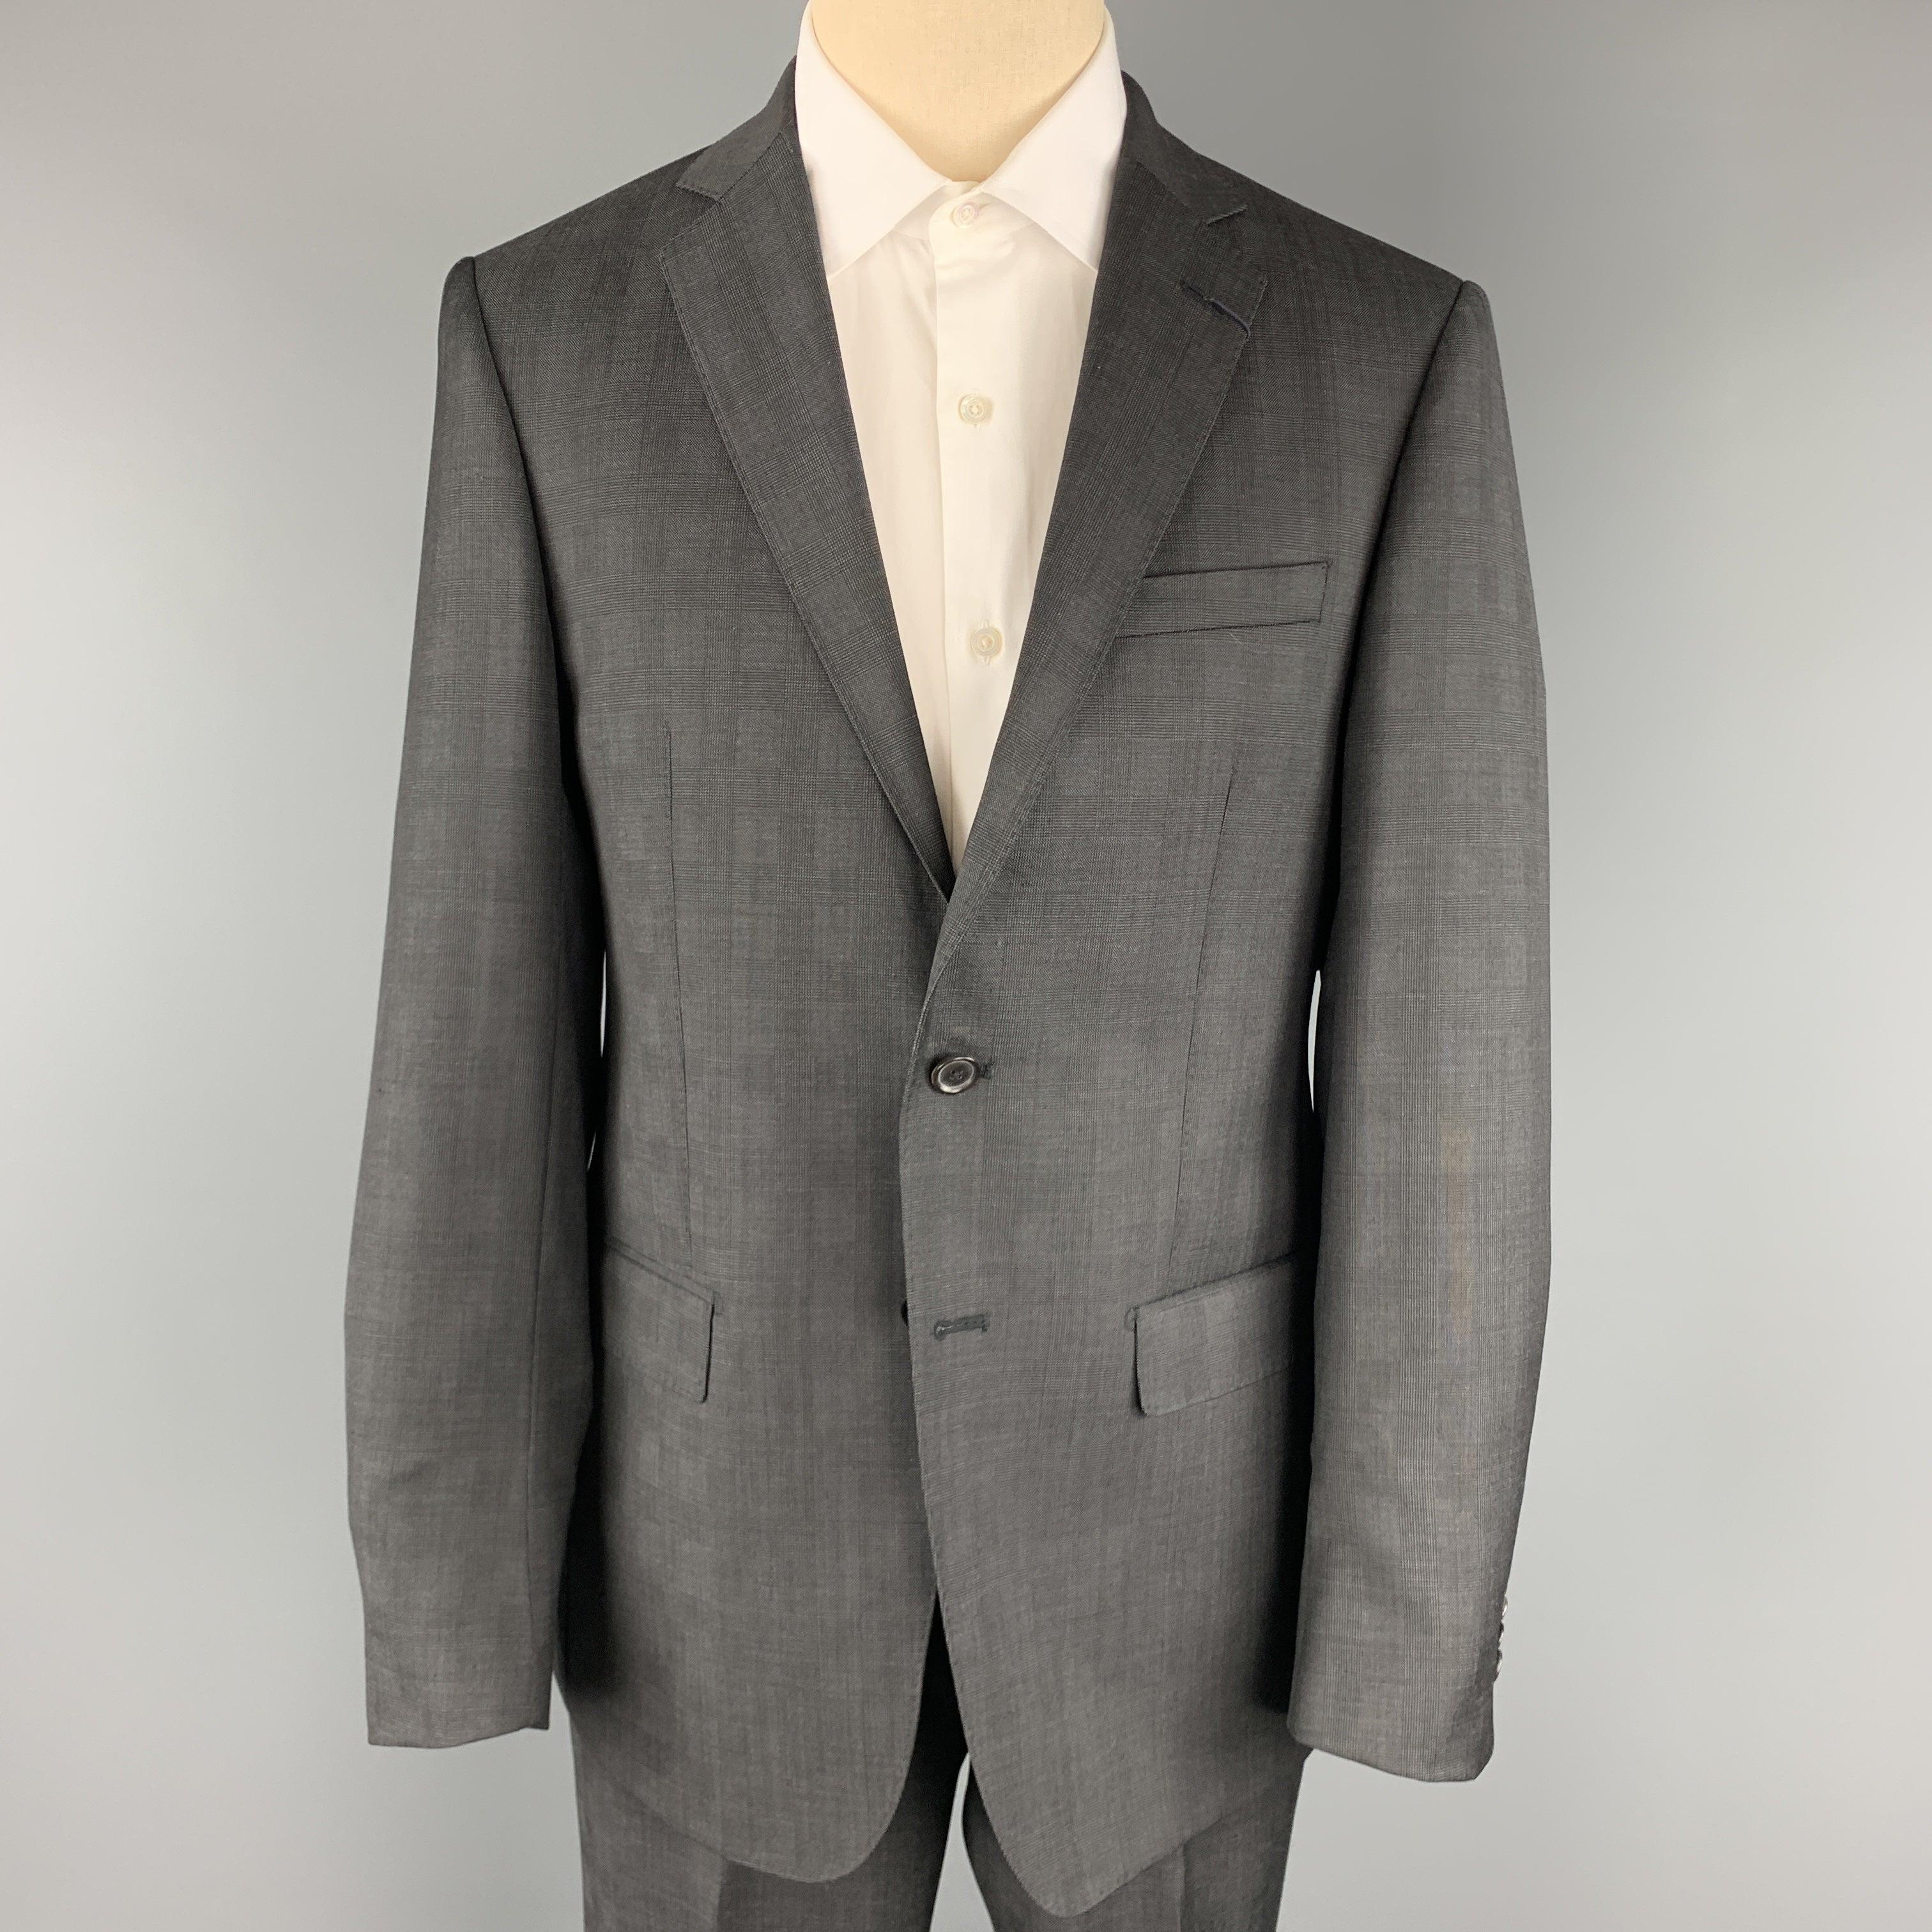 ELOE TAHARI
suit comes in charcoal glenplaid wool and includes a single breasted, two button sport coat with notch lapel and matching flat front trousers. Made in Canada.New with Tags. 

Marked:   40 REG 

Measurements: 
  -JacketShoulder: 17